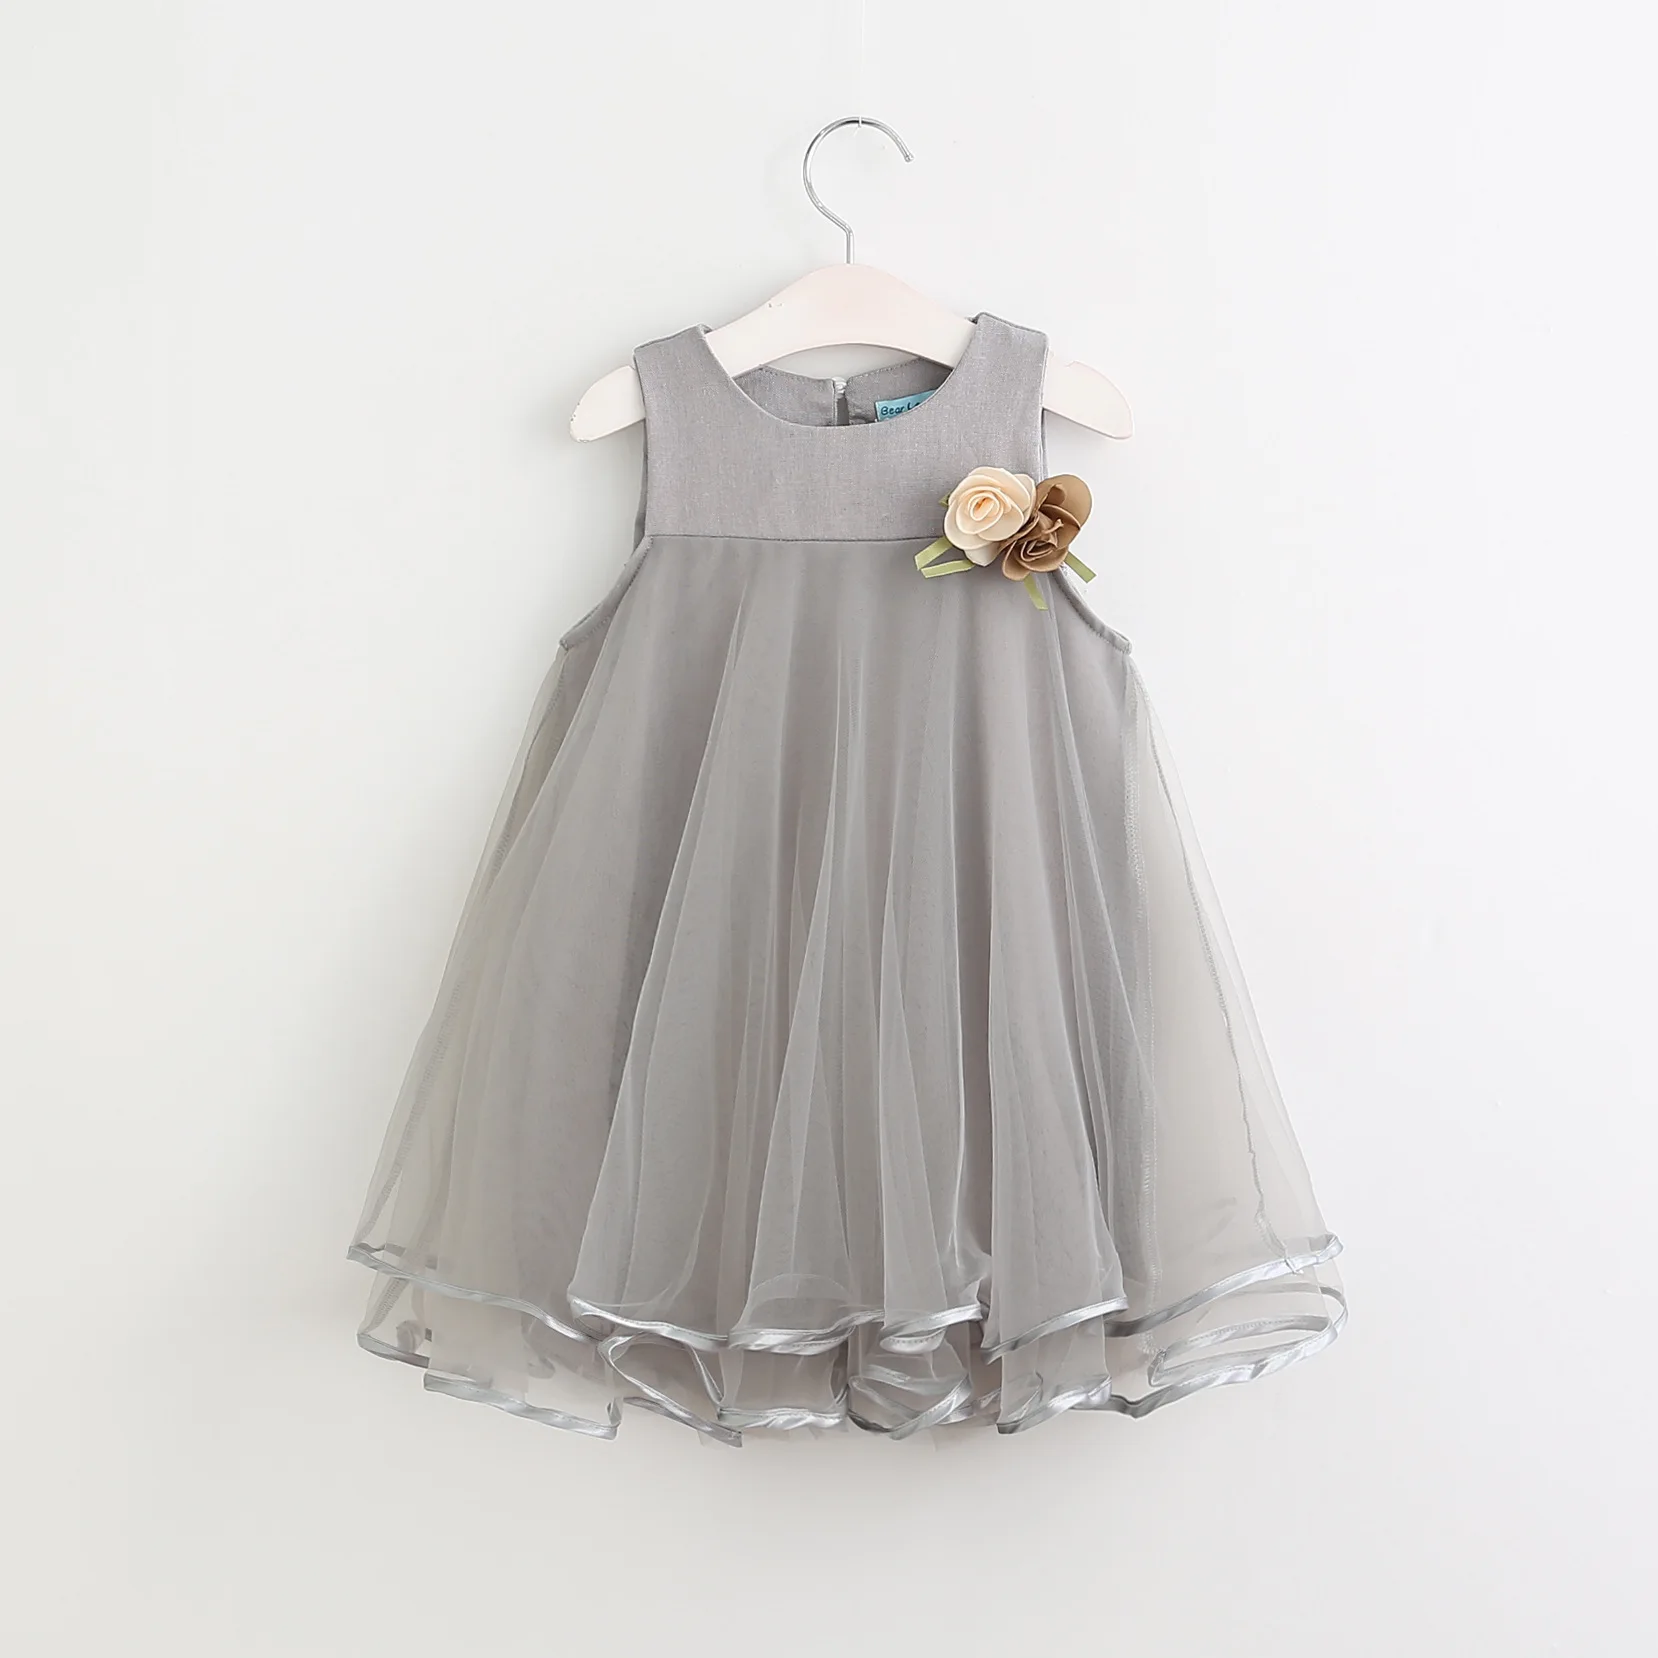 New Simple Kids Dress Designs - Easy To Make At Home | Flickr